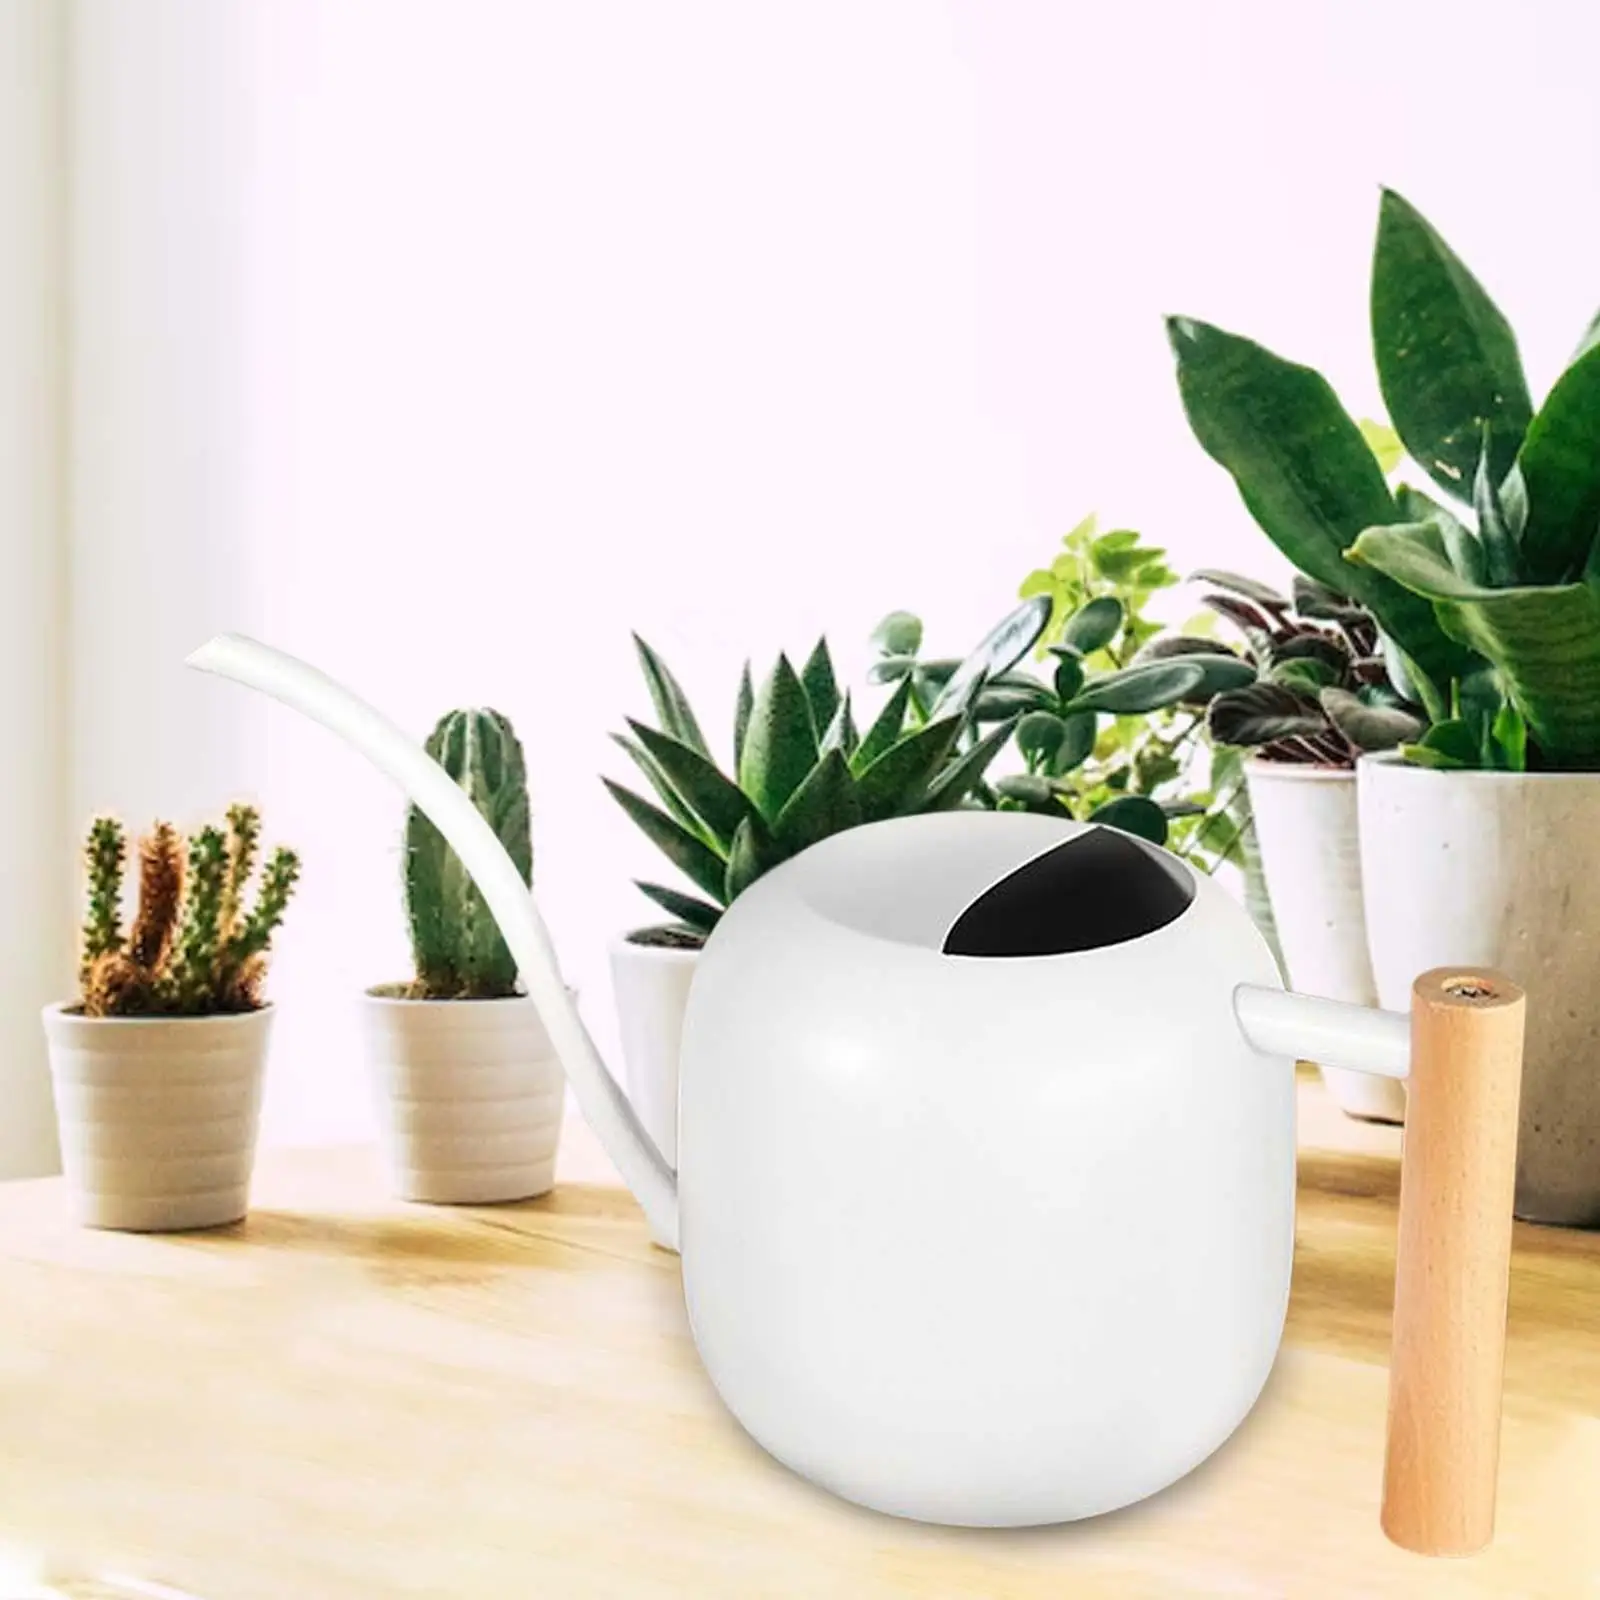 Stainless Steel Watering Can Long Mouth Wooden Handle Watering Flower Kettle for Home Garden Outdoor Shower Decorative